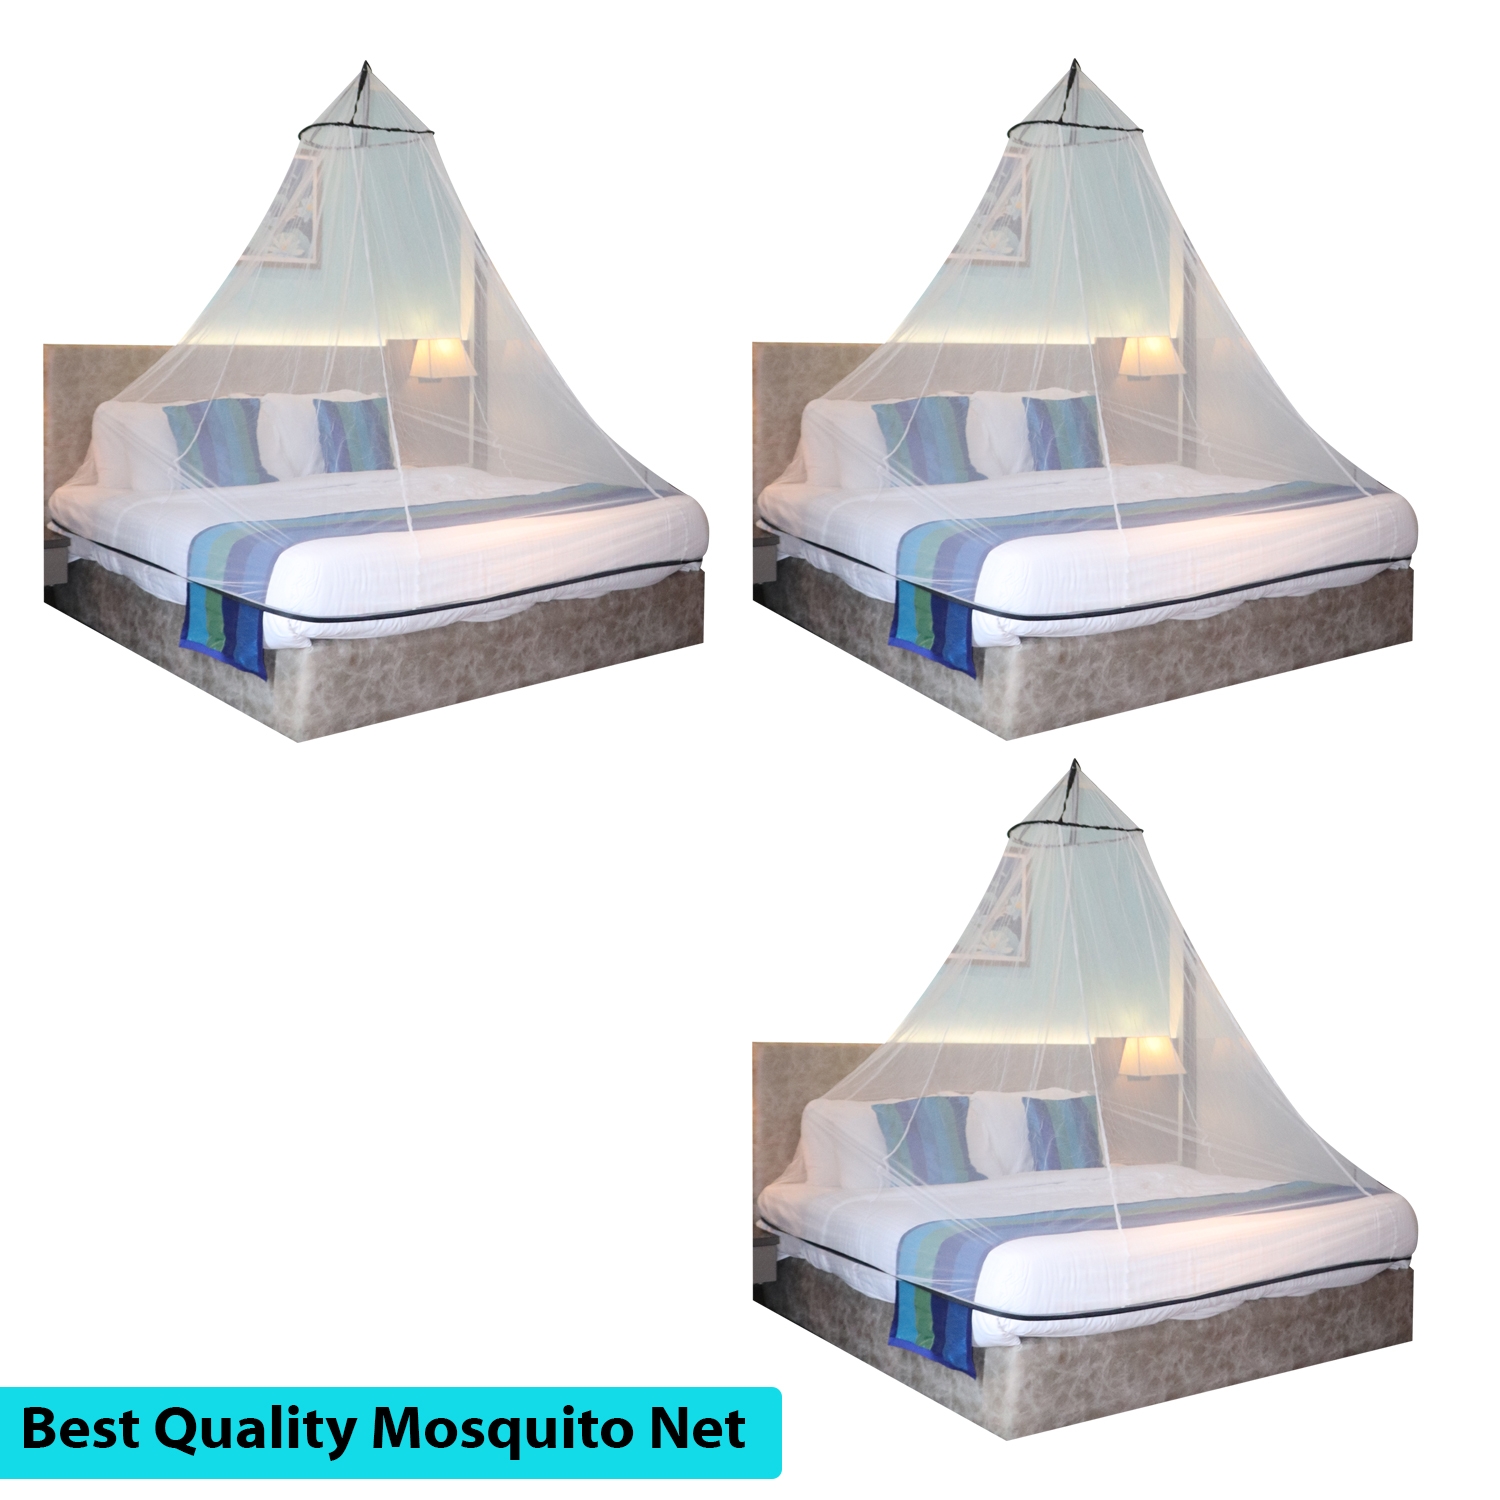 SILVER SHINE | Mosquito Net for Double Bed, King-Size, Round Ceiling Hanging Foldable Polyester Net White And Black Pack 3 